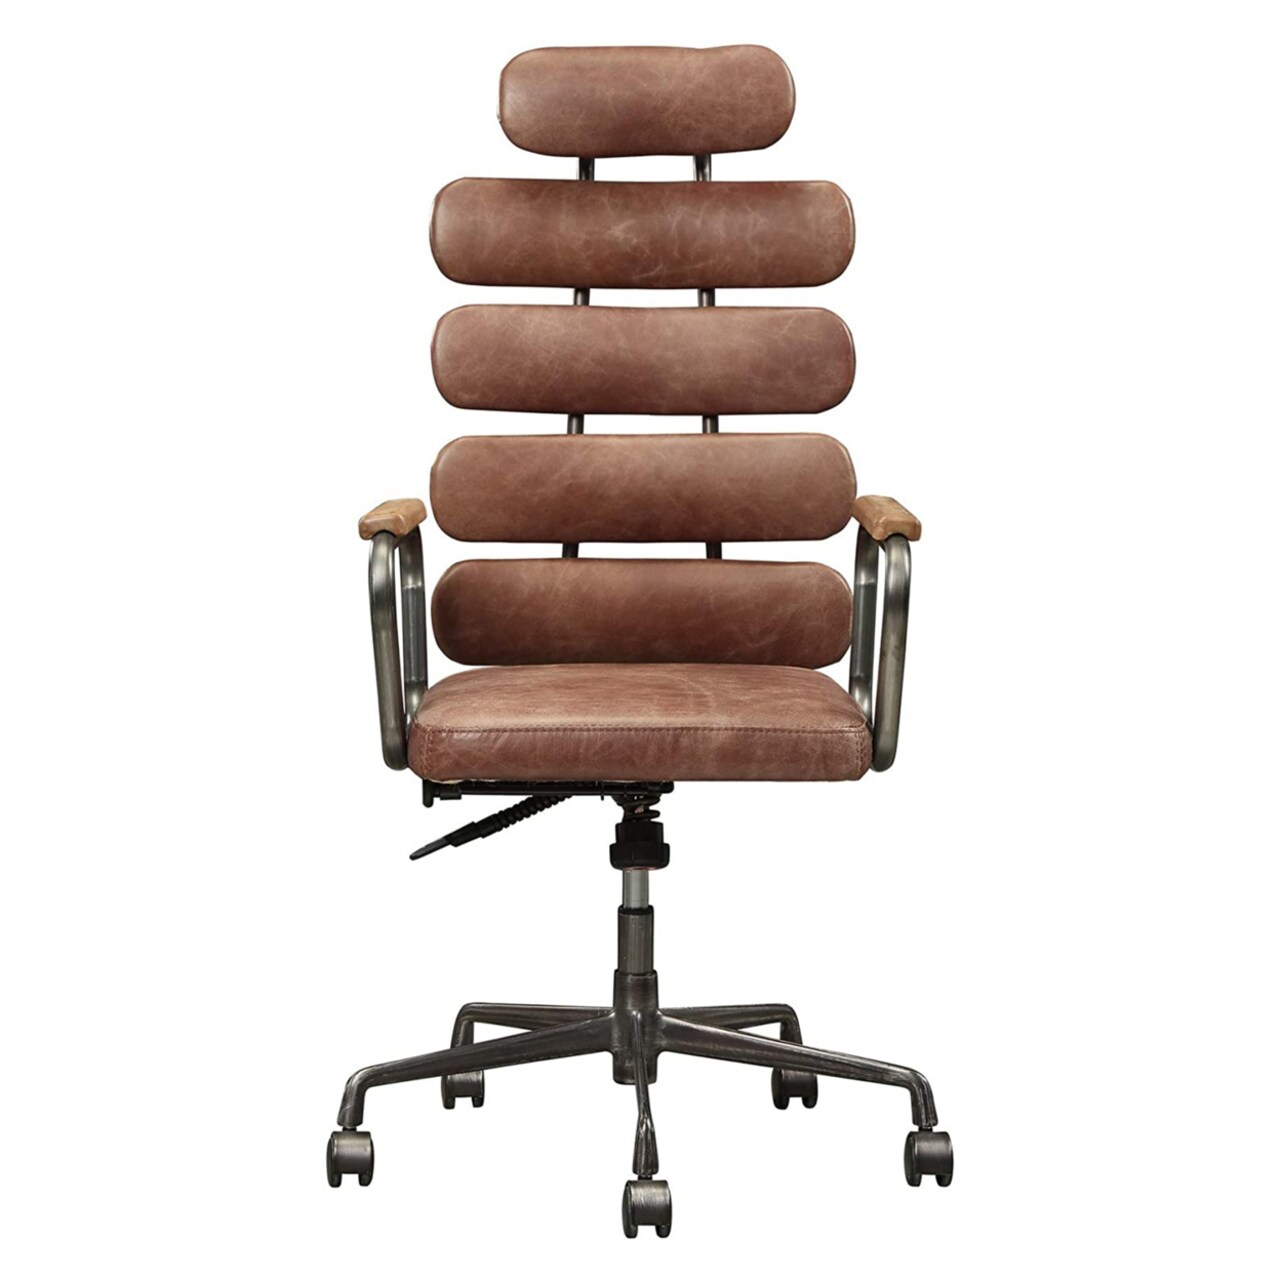 Saltoro Sherpi Leatherette Metal Swivel Executive Chair with Five Horizontal Panels Backrest, Brown and Gray-